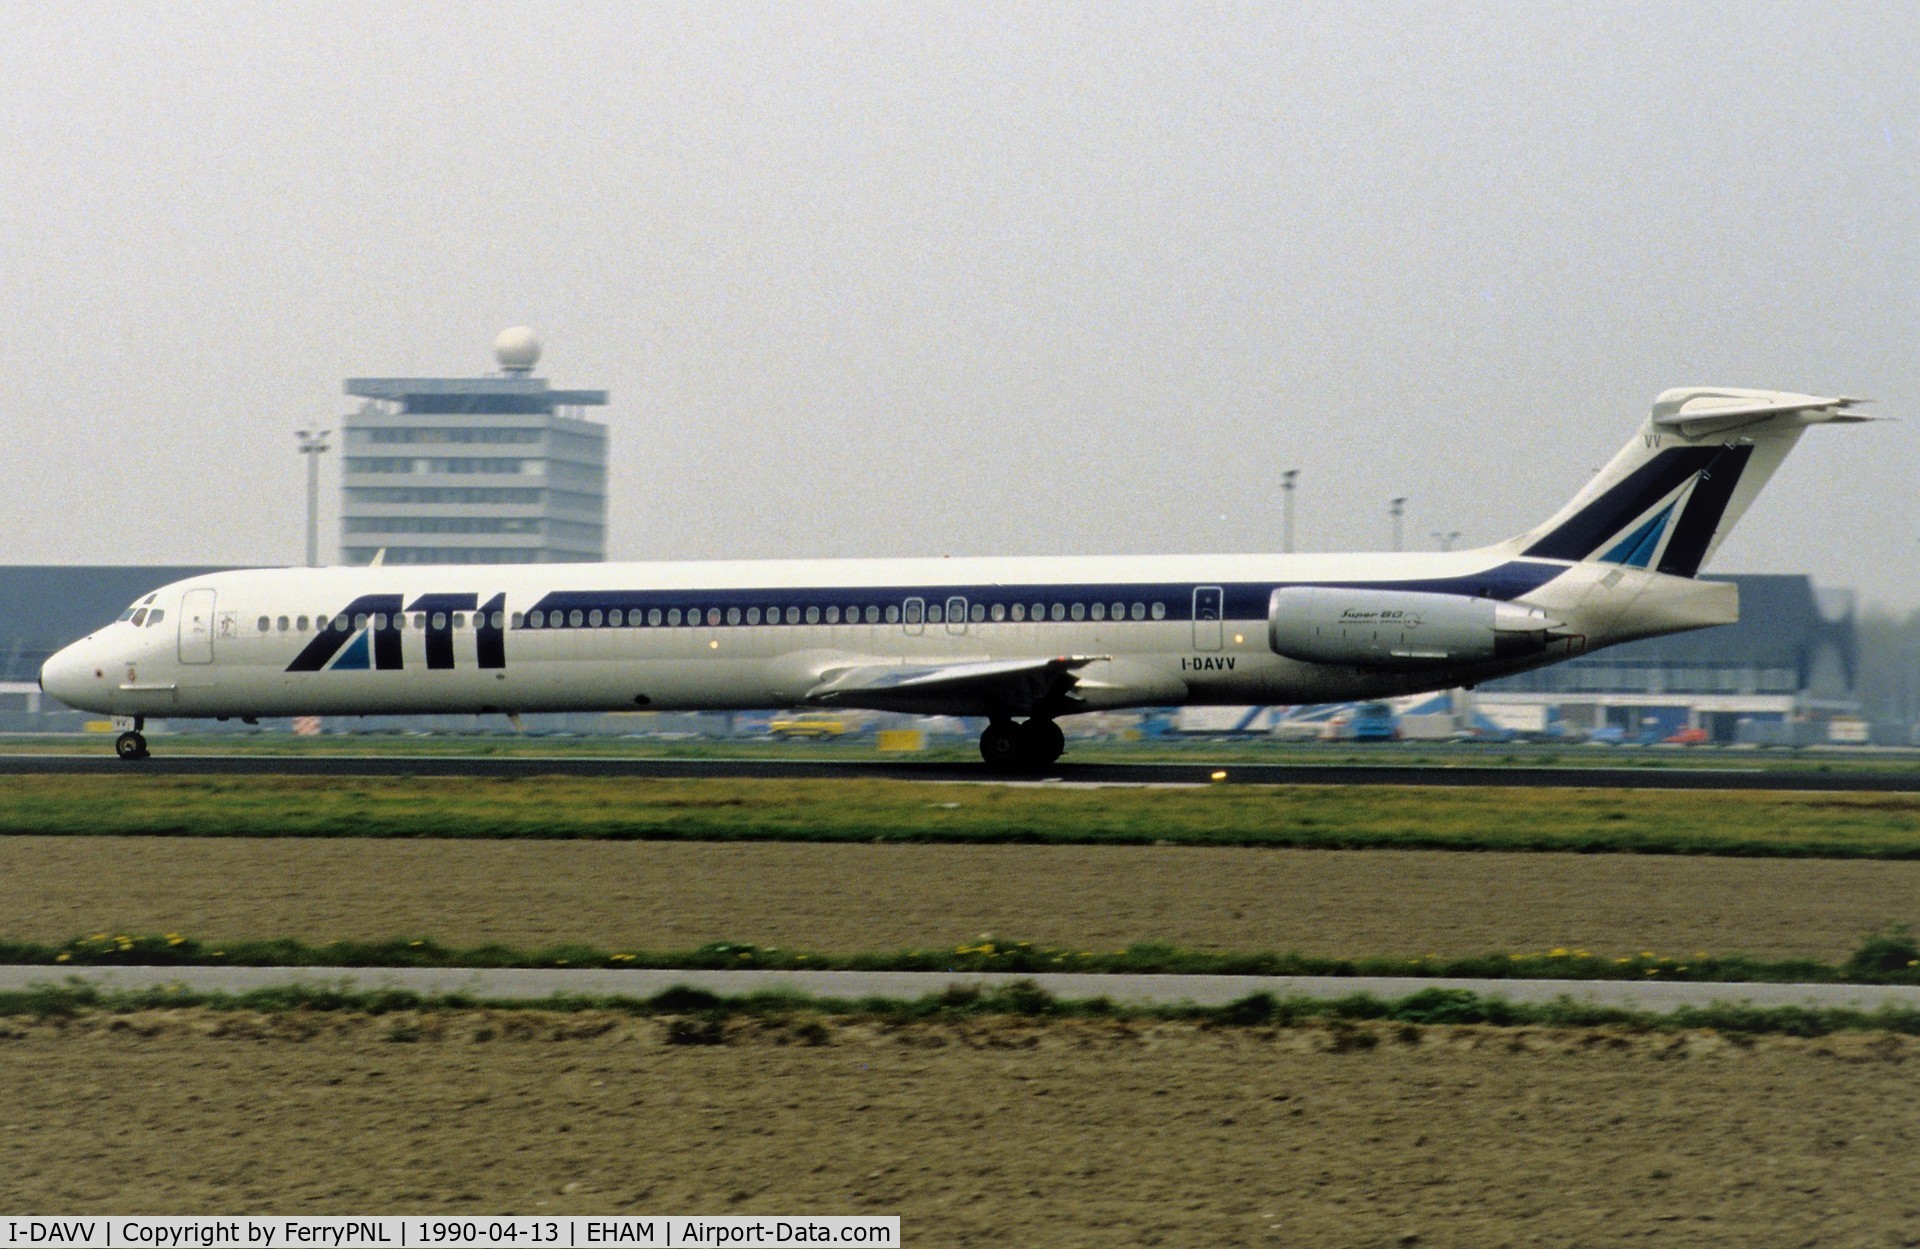 I-DAVV, 1989 McDonnell Douglas MD-82 (DC-9-82) C/N 49795, ATI MD82 taking-off from AMS